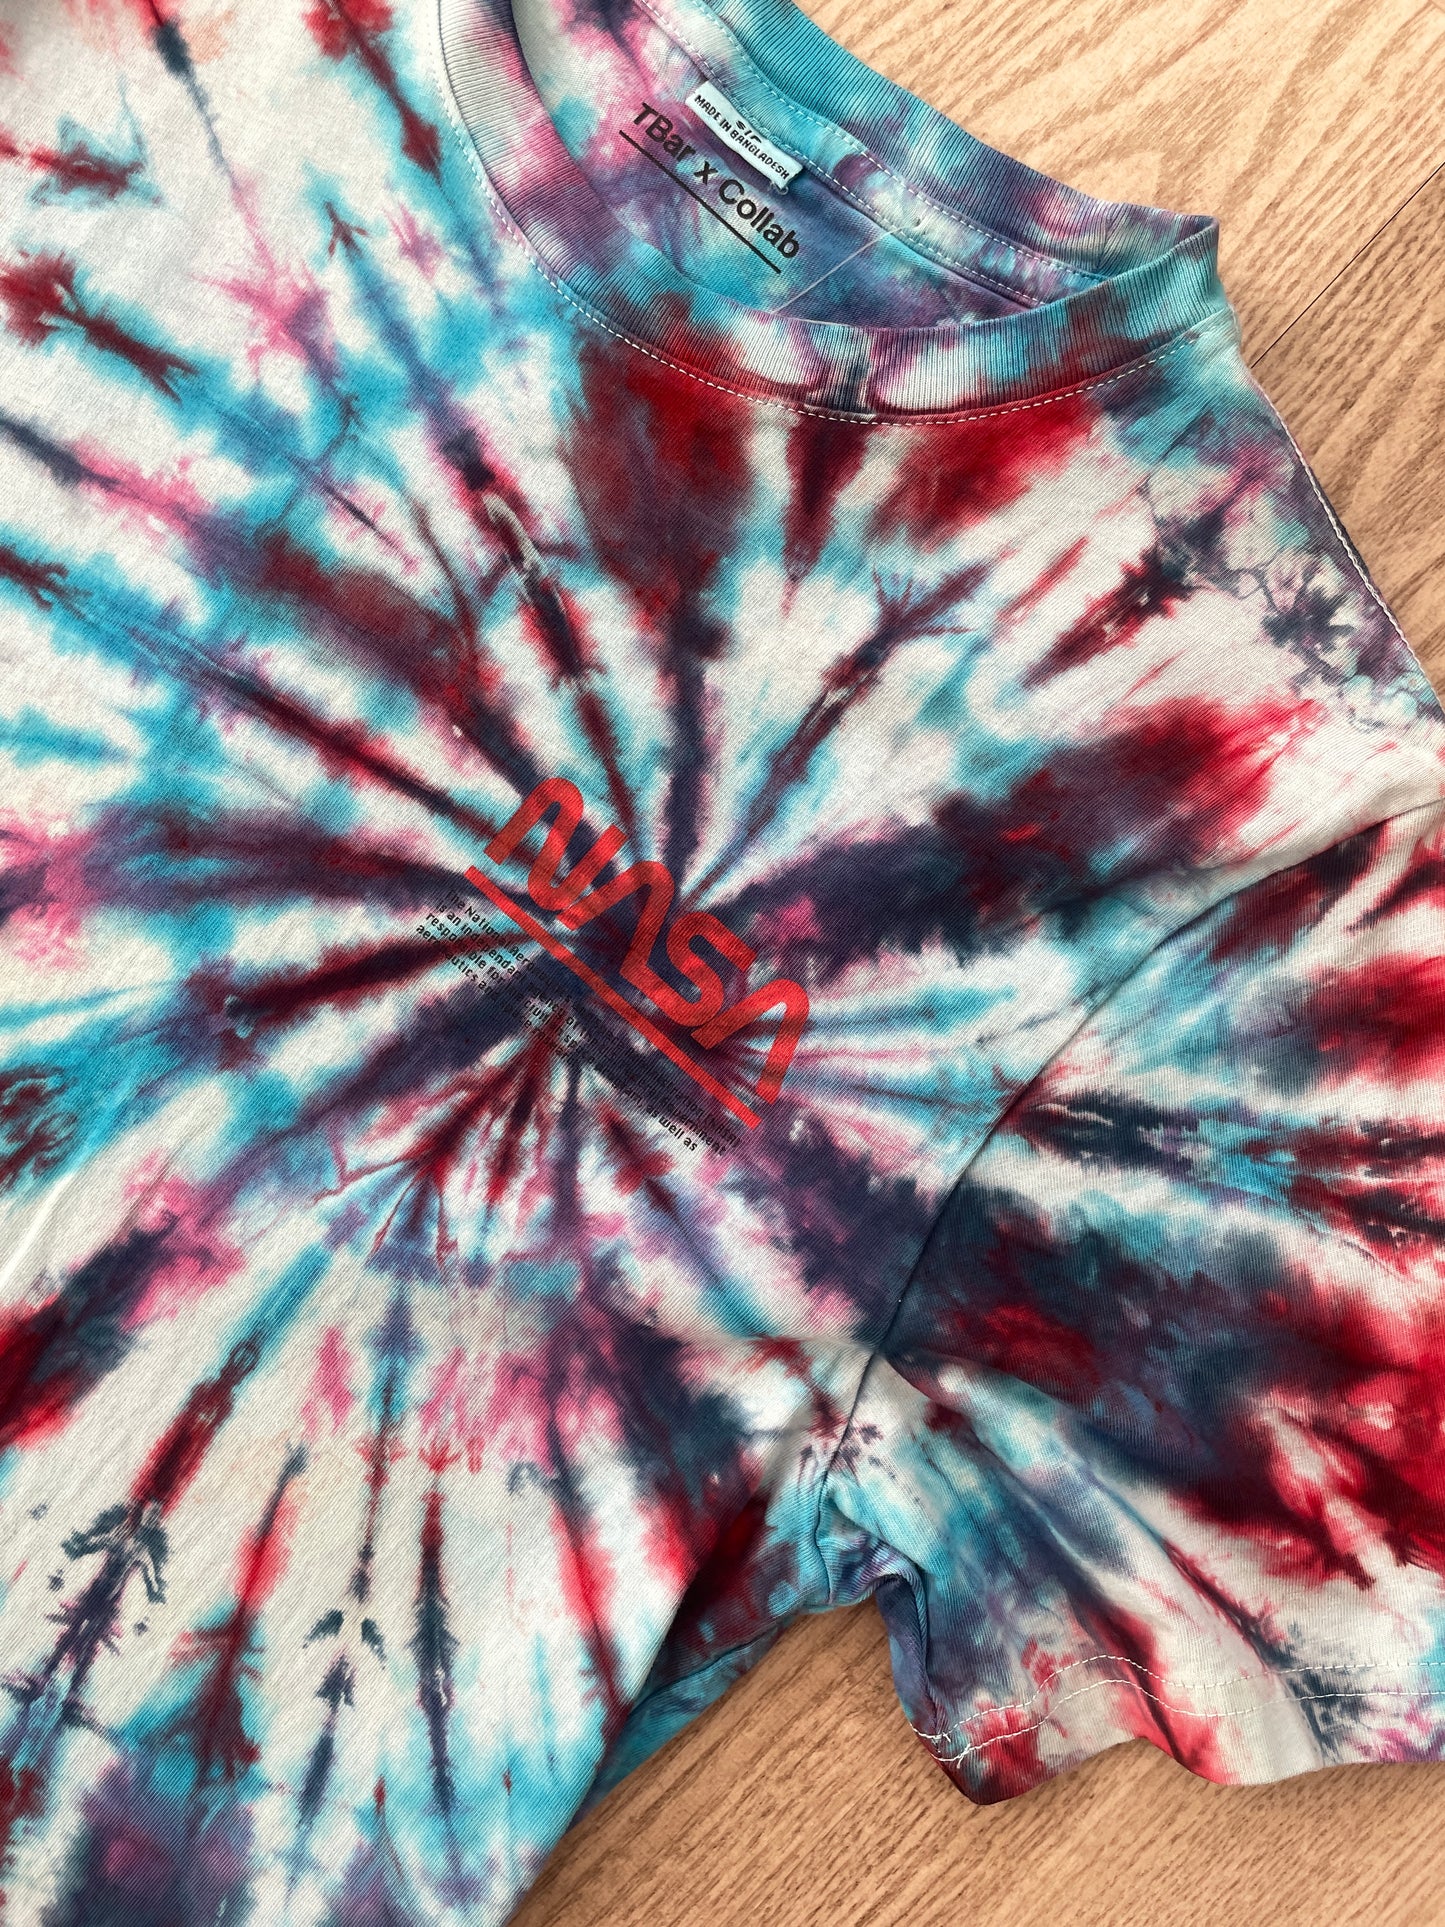 SMALL NASA Humans in Space Handmade Tie Dye Short Sleeve T-Shirt | One-Of-a-Kind Upcycled Red, White, and Blue Spiral Top